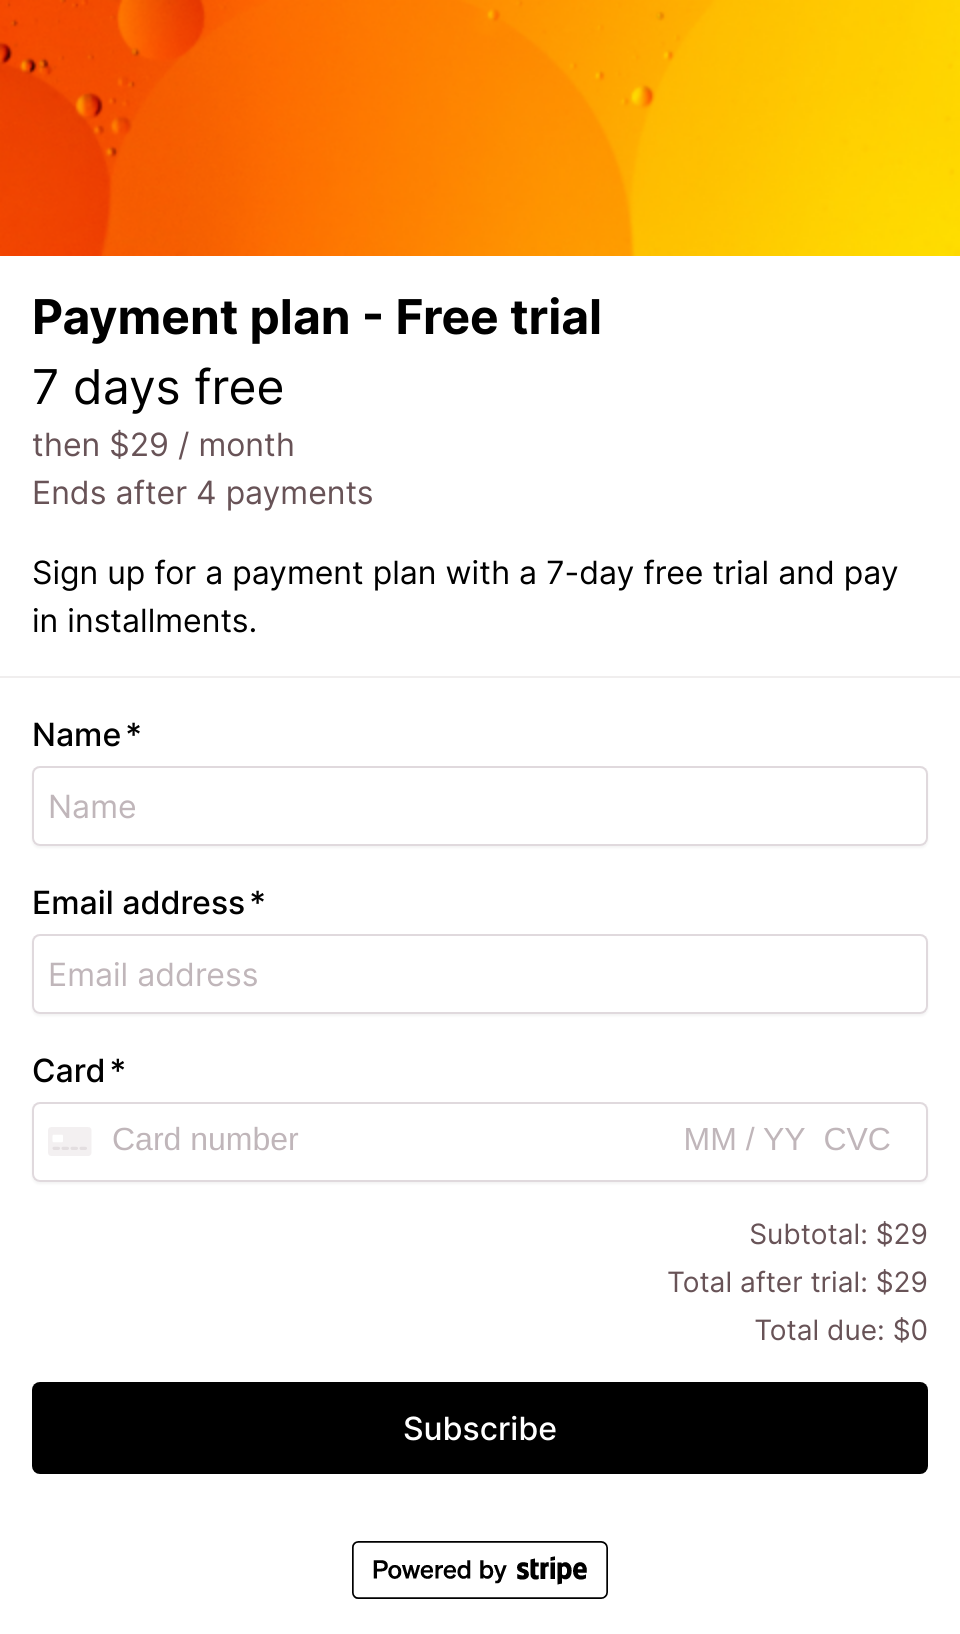 Payment plan free trial checkout form